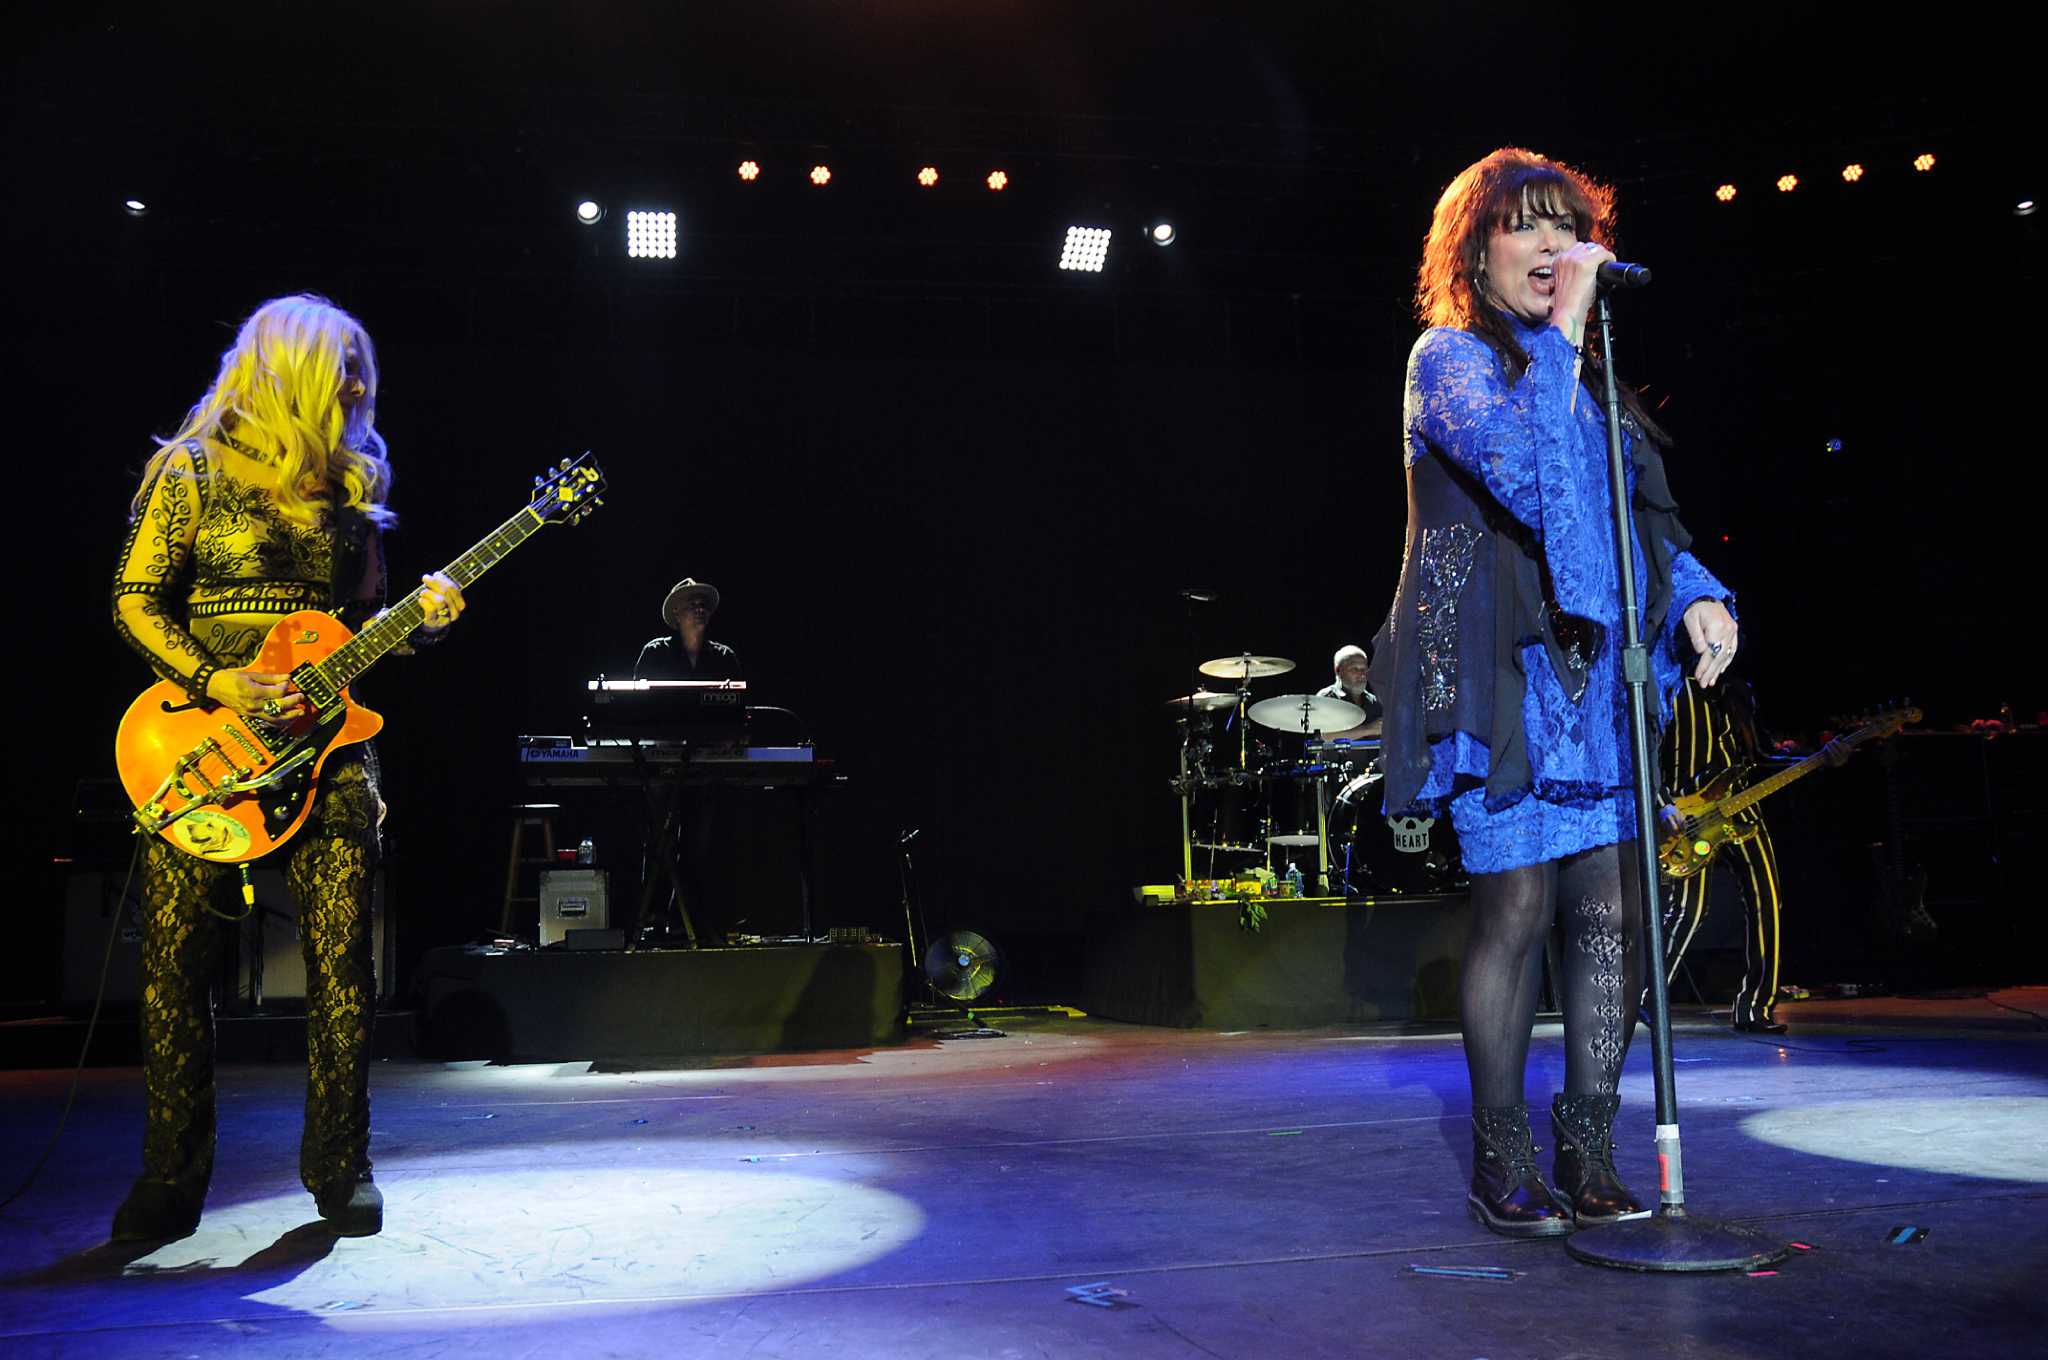 Rock band Heart returns to the road after three years with Love Alive tour - Houston ...2048 x 1360